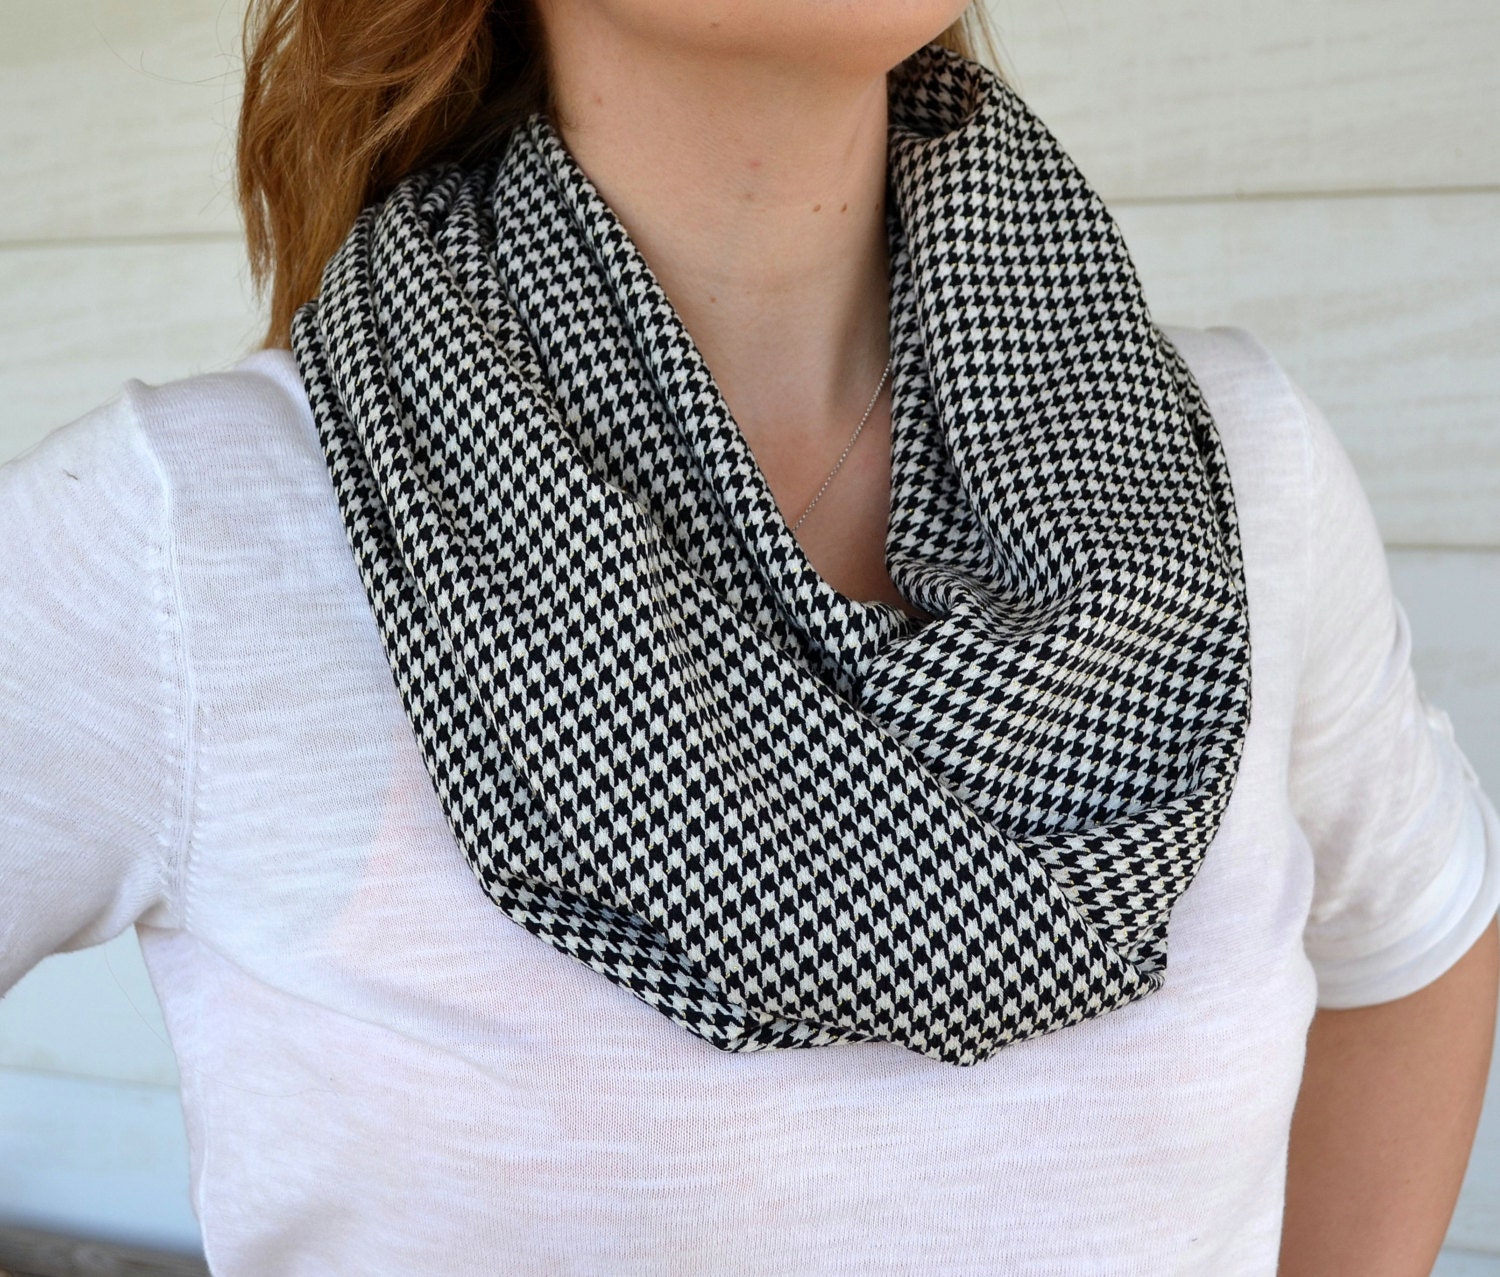 Black & White Hounds Tooth Patterned by TidyLikeDesigns on Etsy